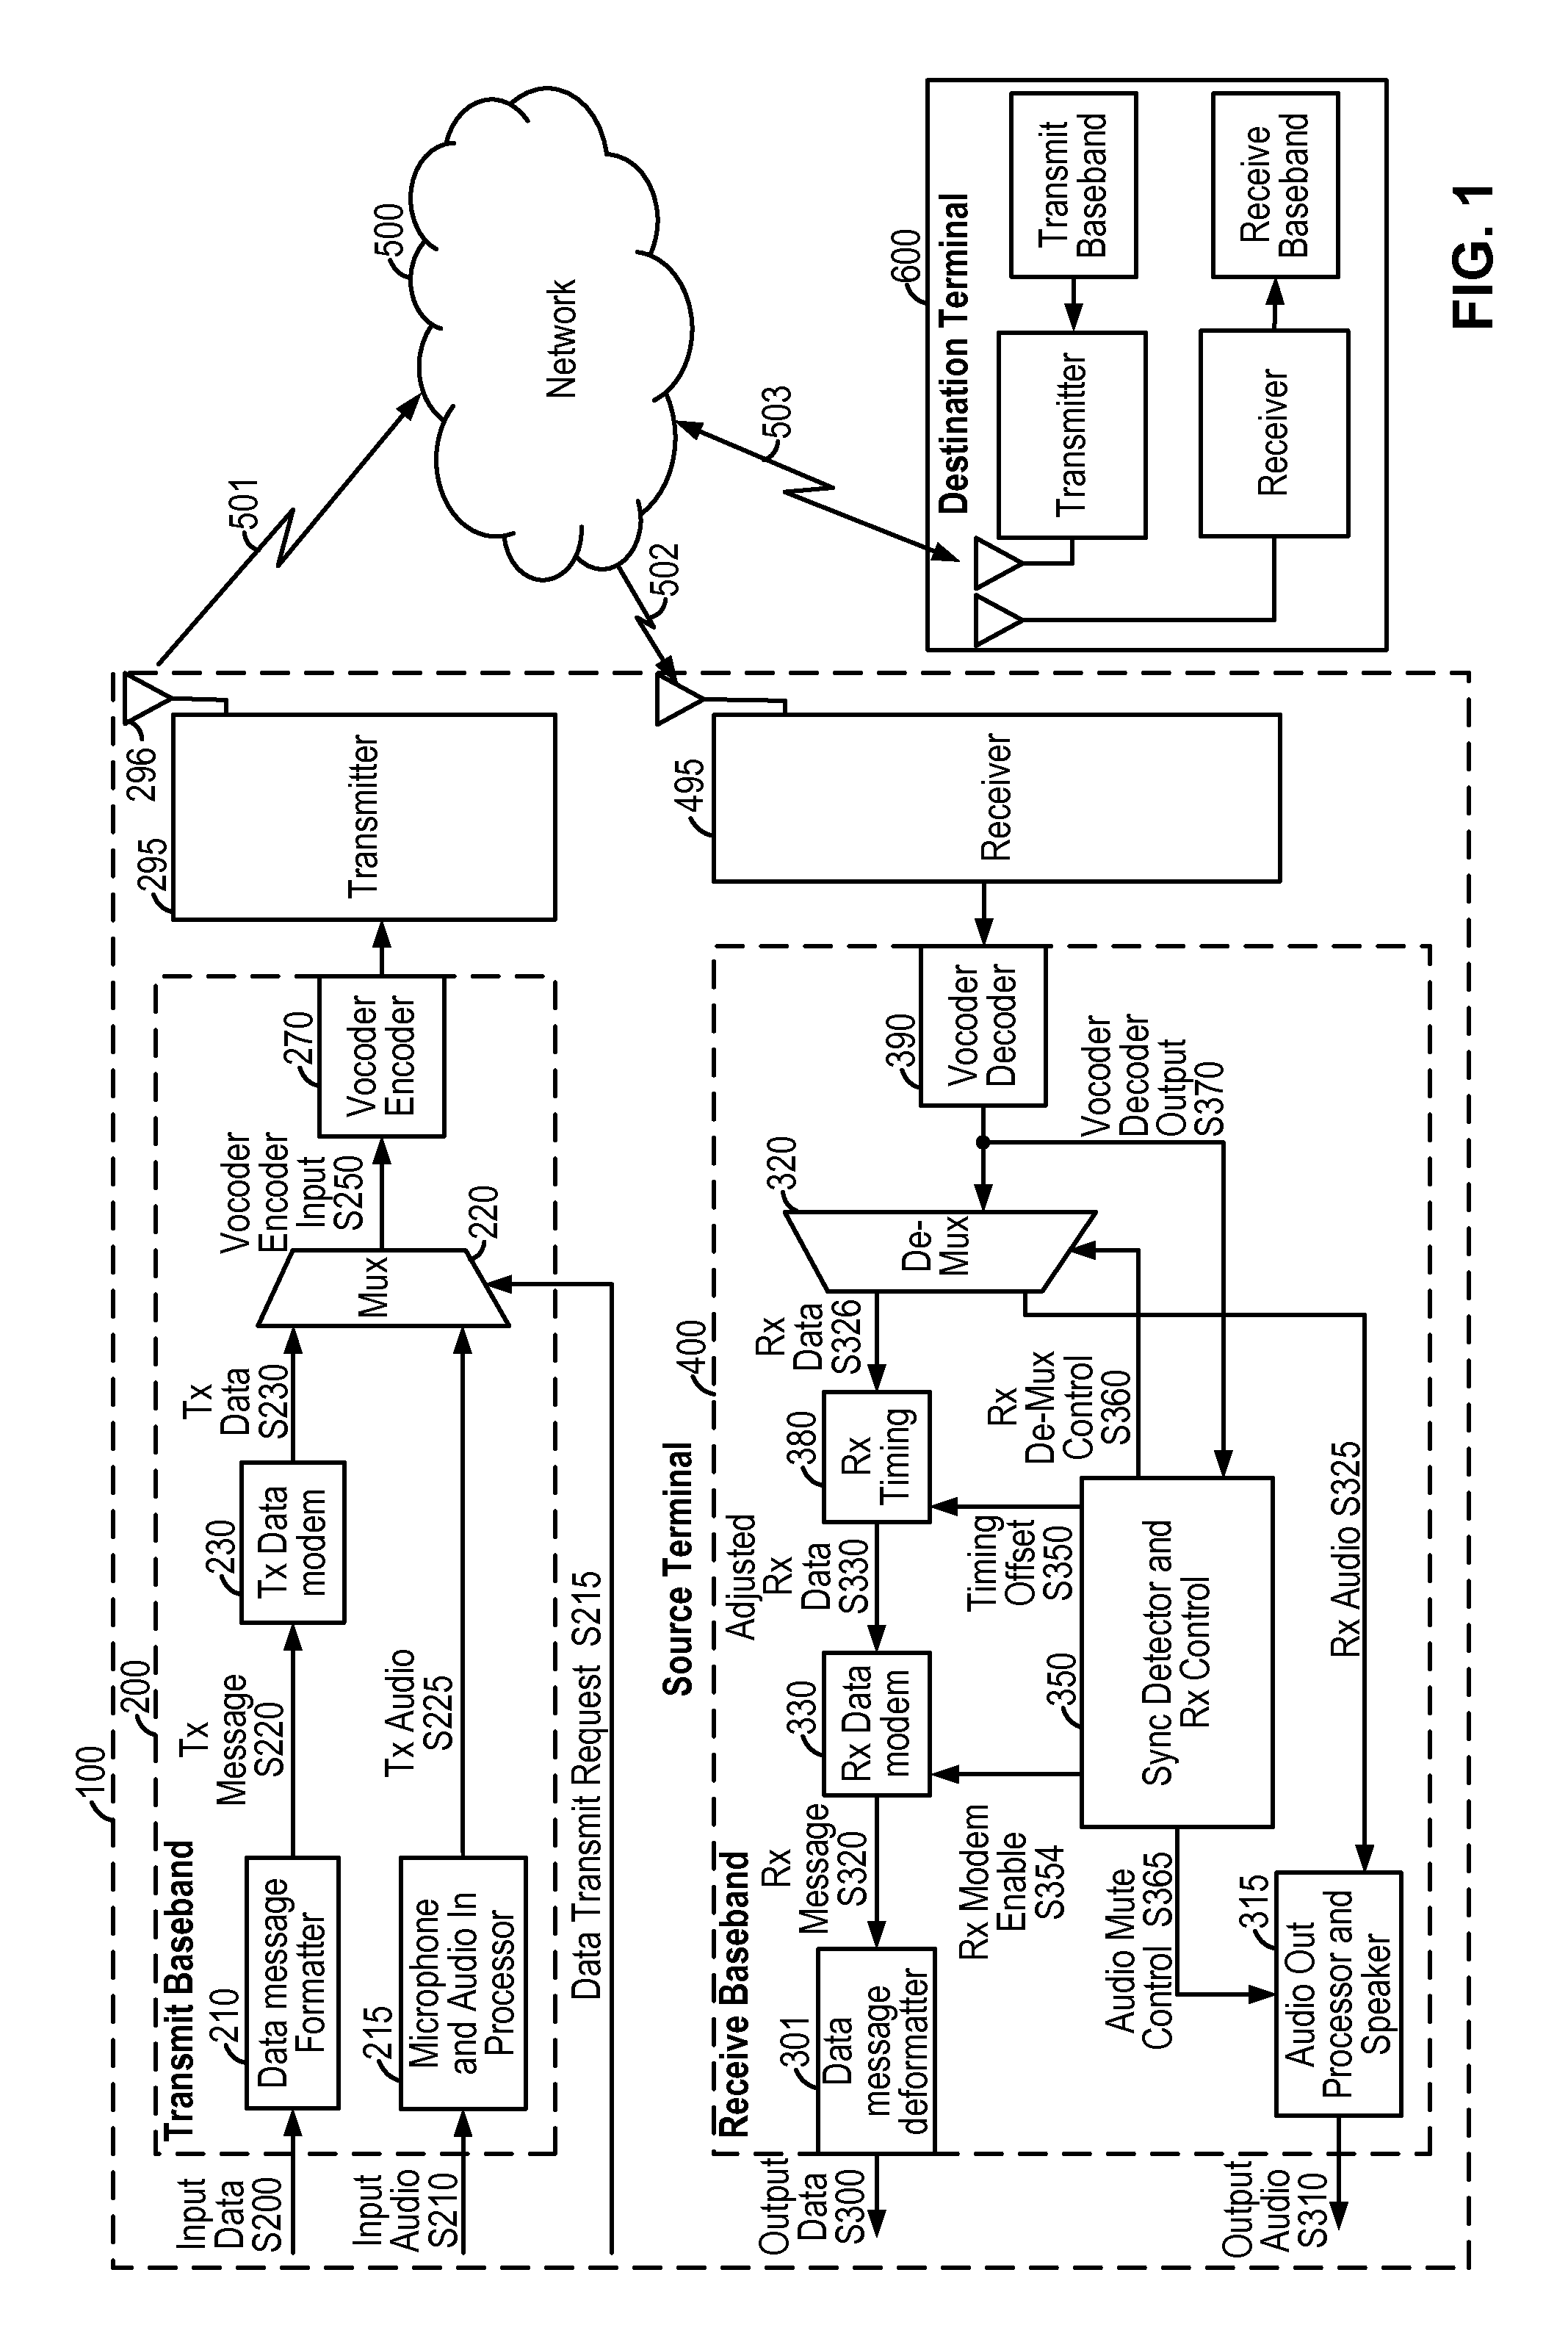 System and method of an in-band modem for data communications over digital wireless communication networks